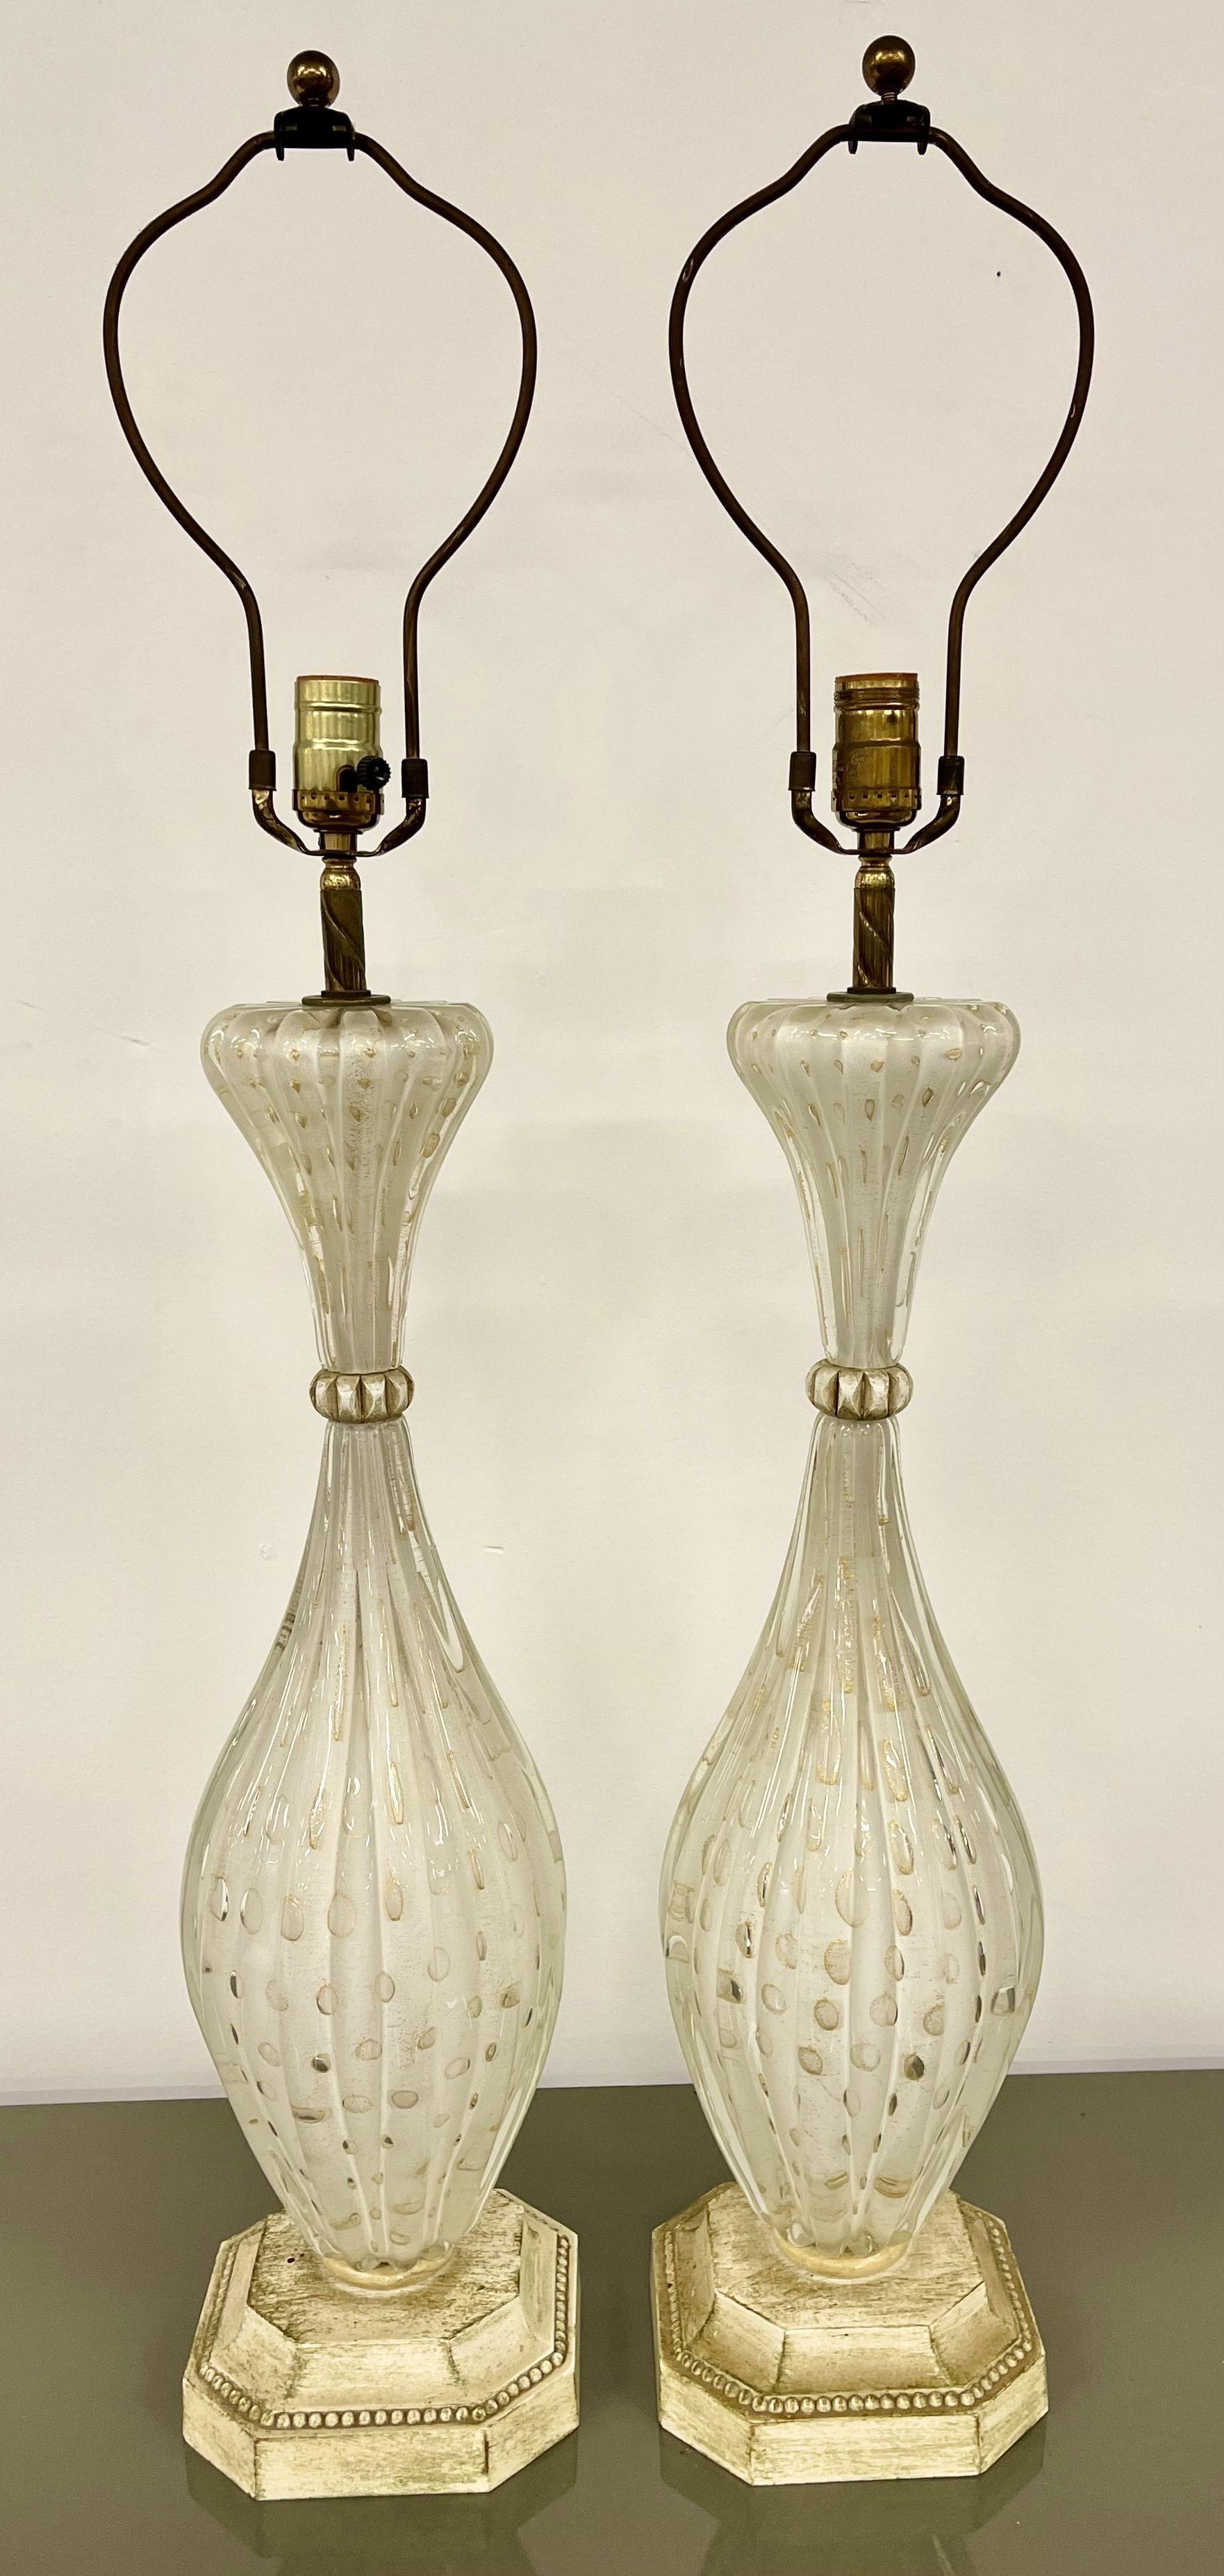 Pair of Murano Glass Speckle Table Lamps. A fine pair of  Mid Century Modern table lamps having white and clear bulbous form with speckles of gold on white distressed bases. Lamps come without shades. Each lamp takes one bulb.